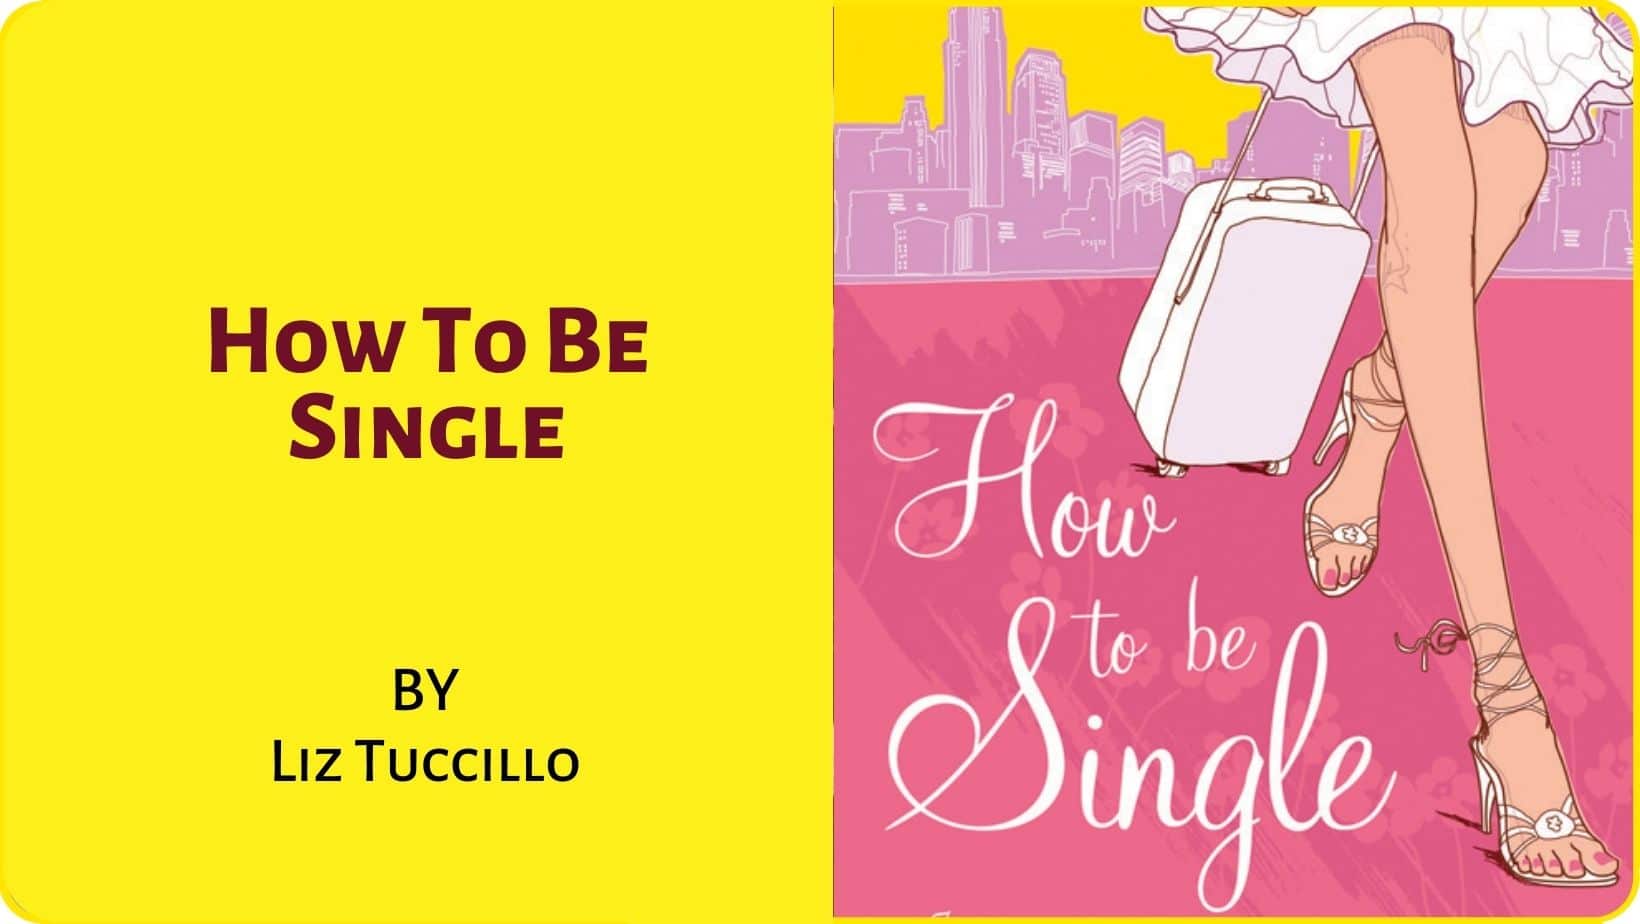 How to Be Single by Liz Tuccillo great books to read if you are going through a breakup